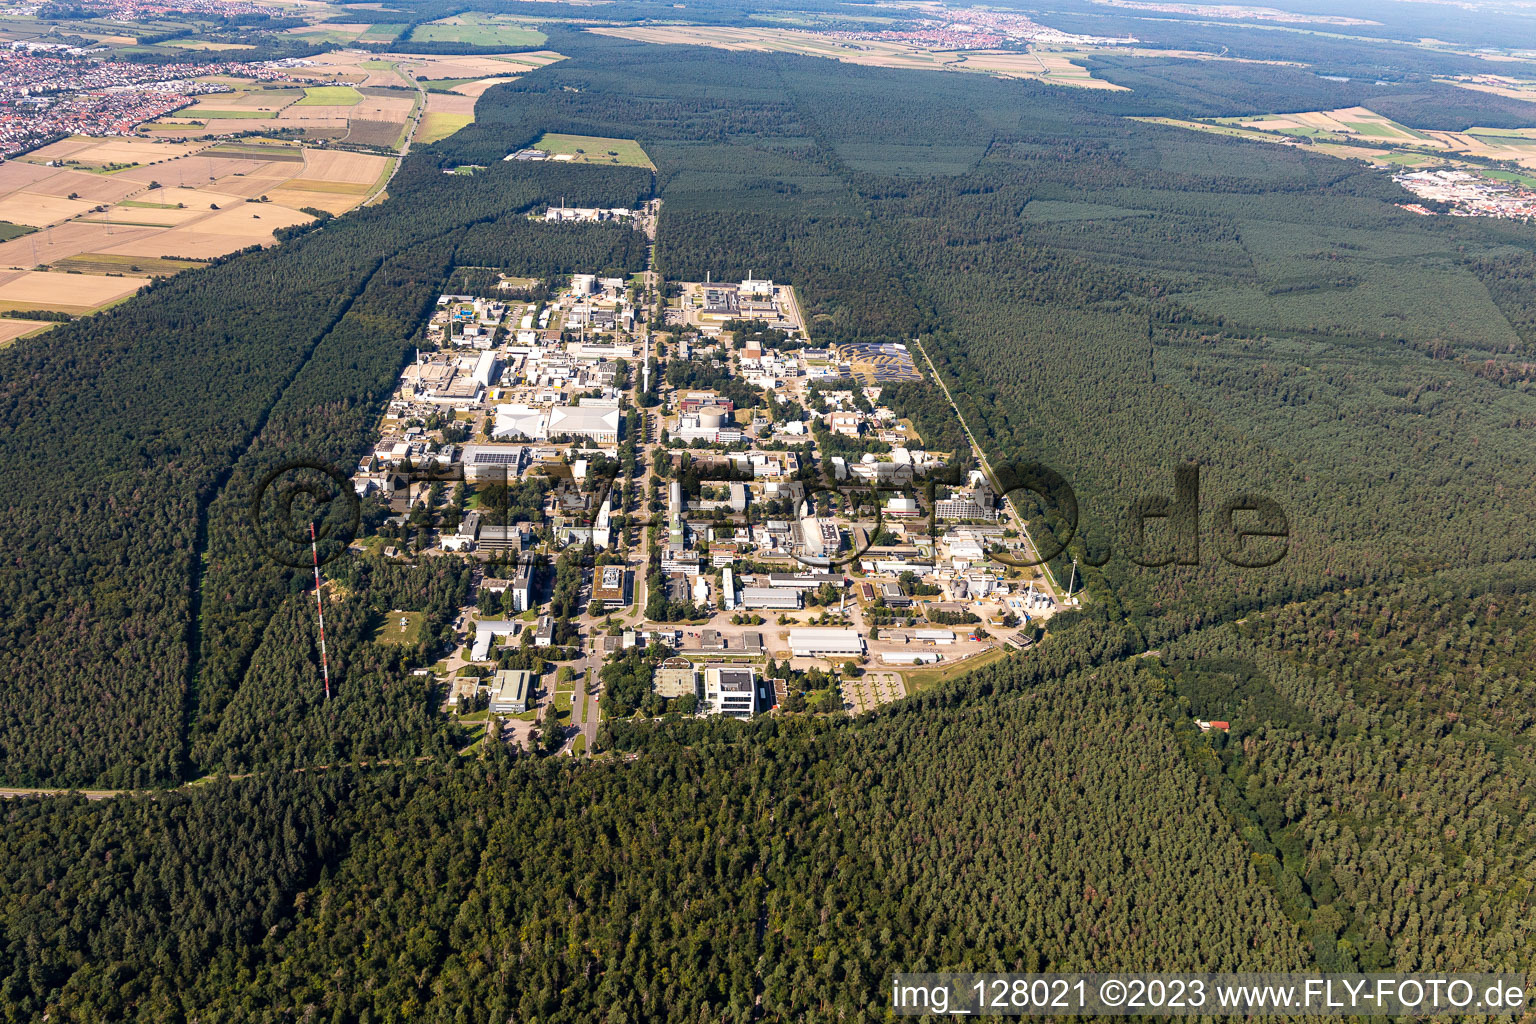 KIT Campus North from the South in the district Neureut in Karlsruhe in the state Baden-Wuerttemberg, Germany